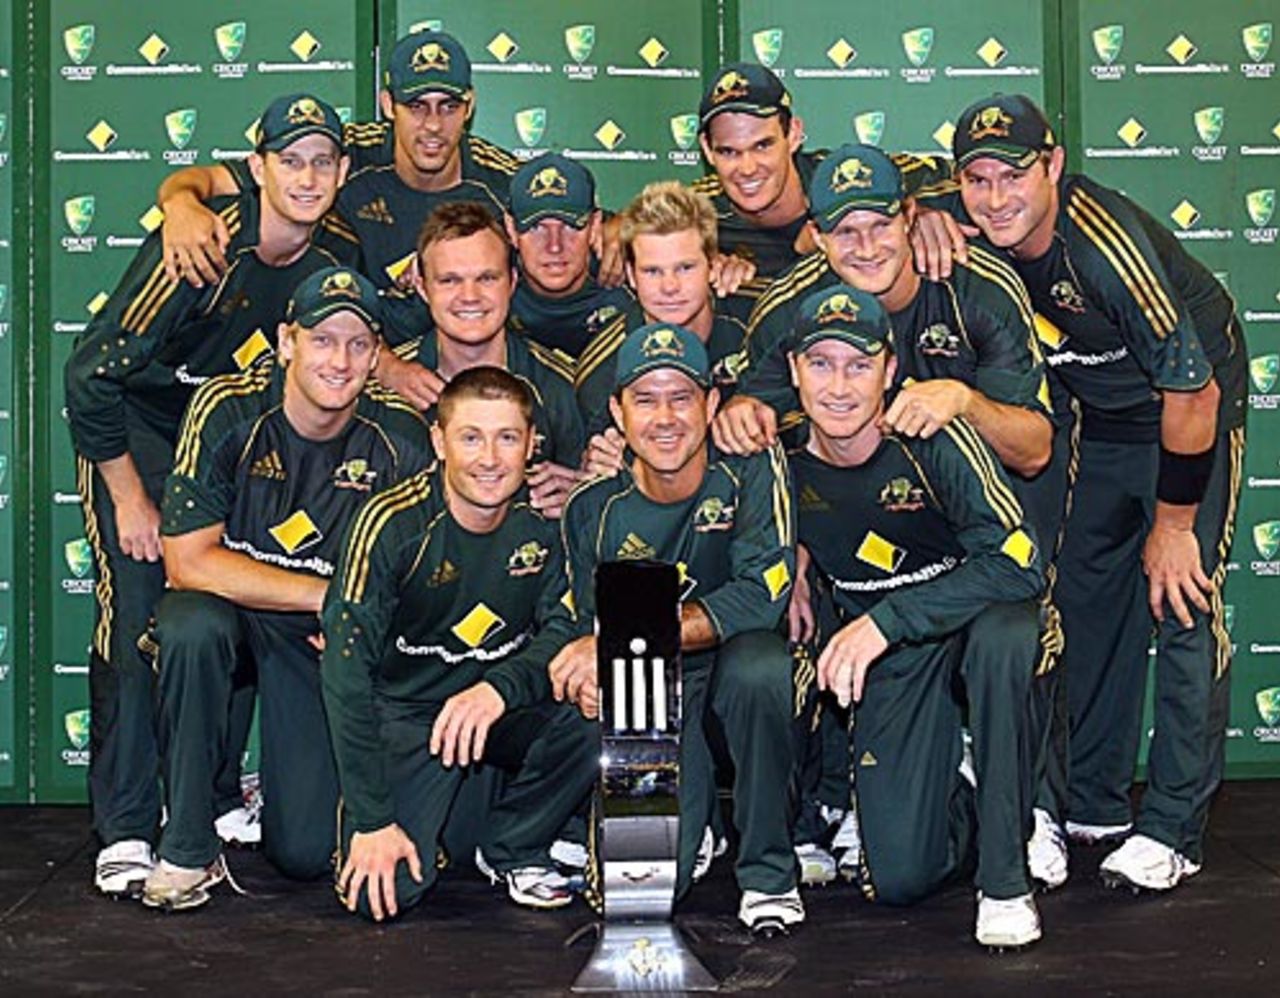 Australia bask in their 4-0 win over West Indies, Australia v West Indies, 5th ODI, Melbourne, 19 February, 2010